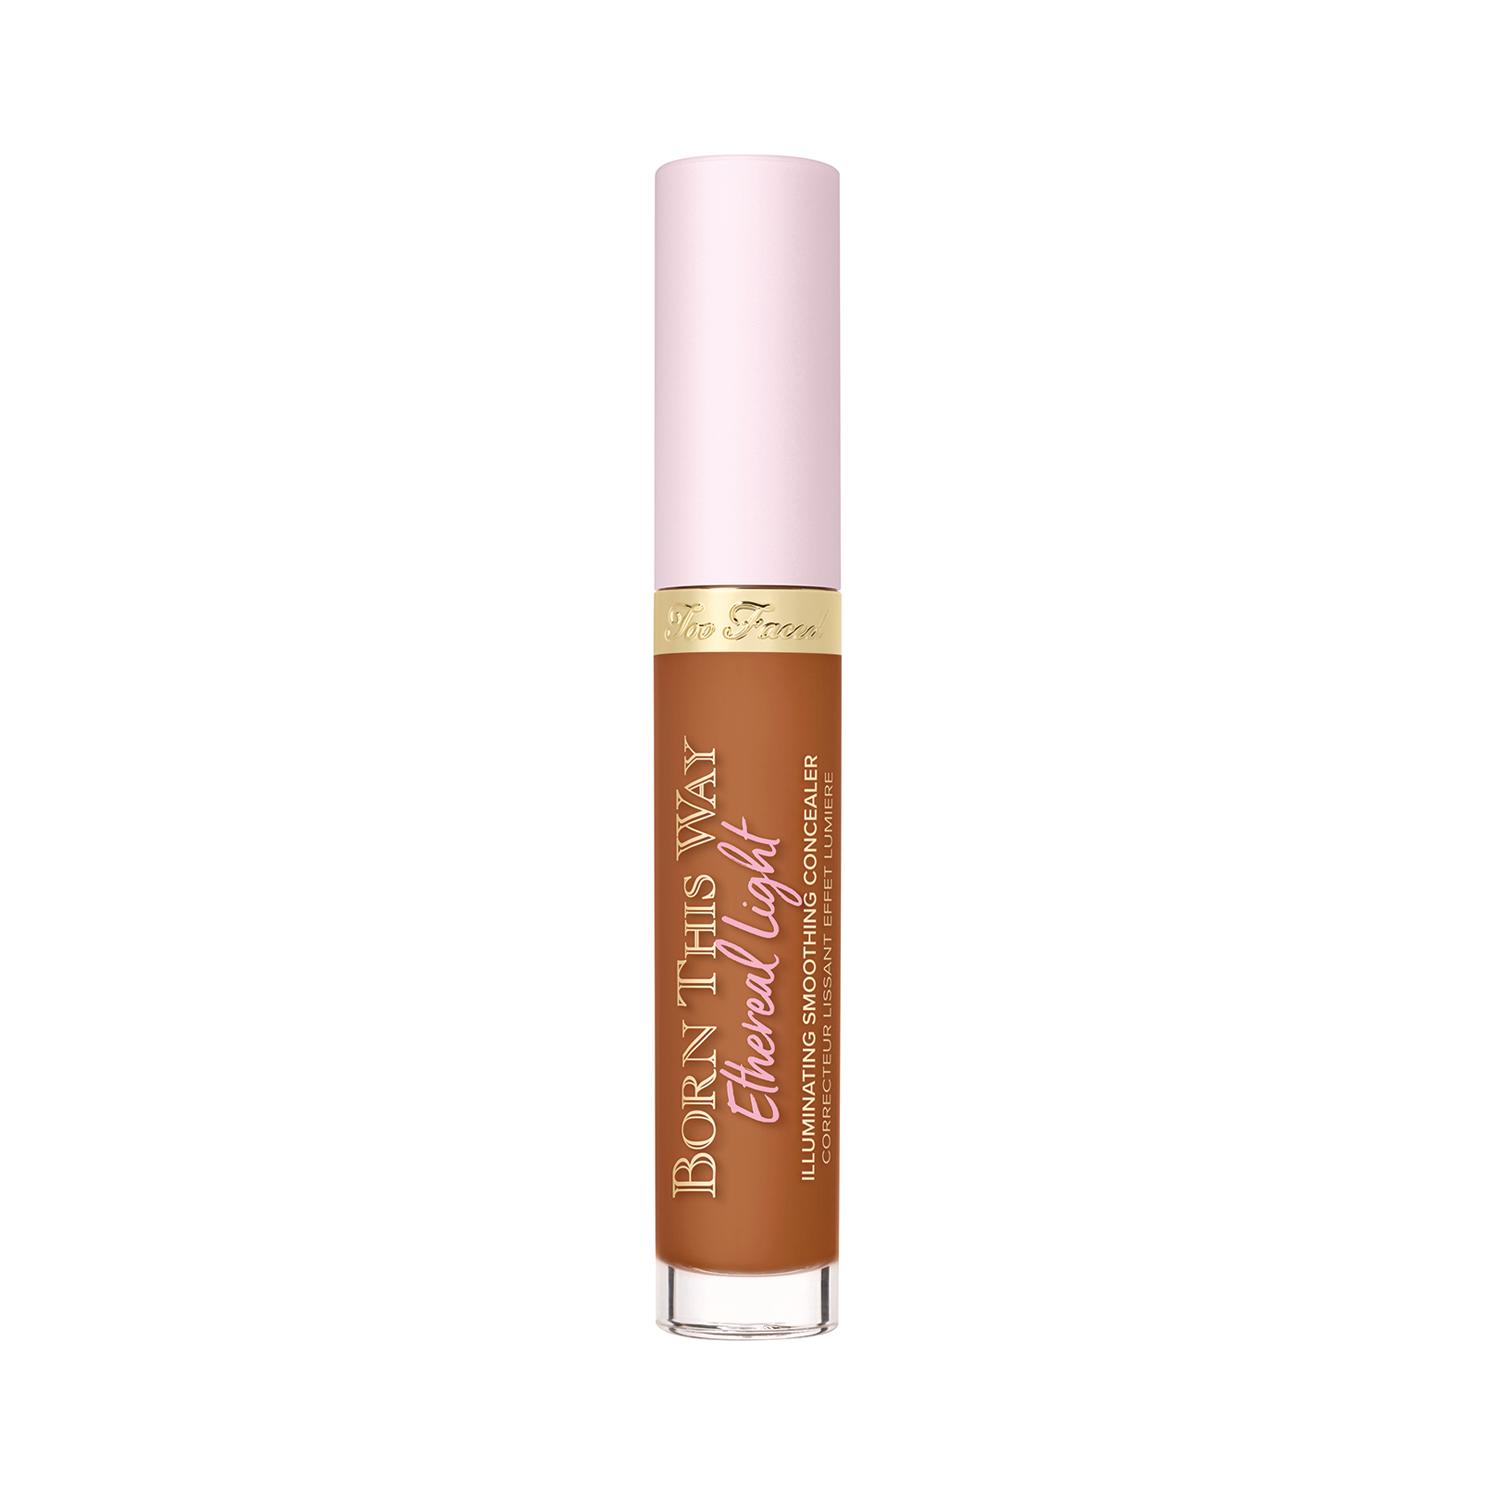 Too Faced | Too Faced Born This Way Illuminating Concealer - Caramel Drizzle (5ml)